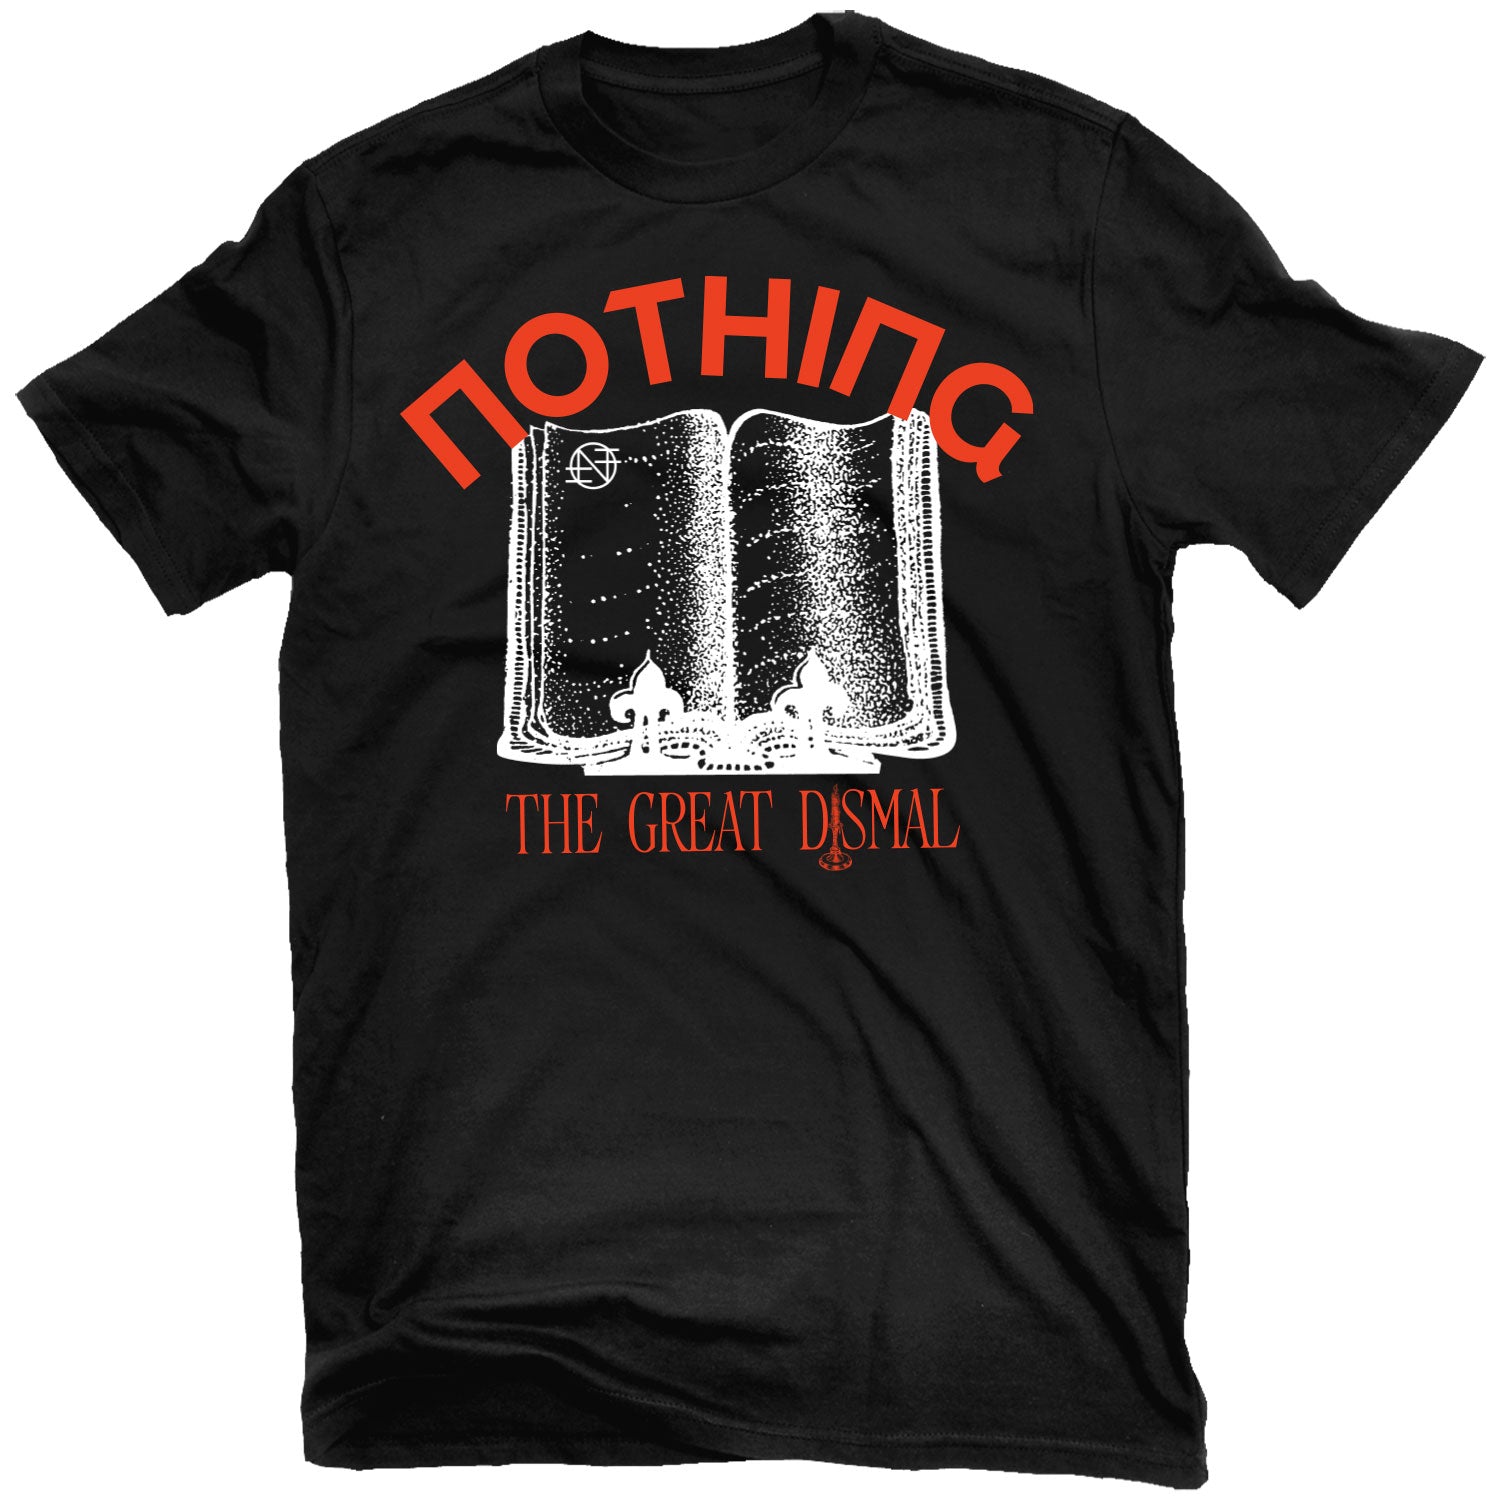 Nothing "Just a Story" T-Shirt